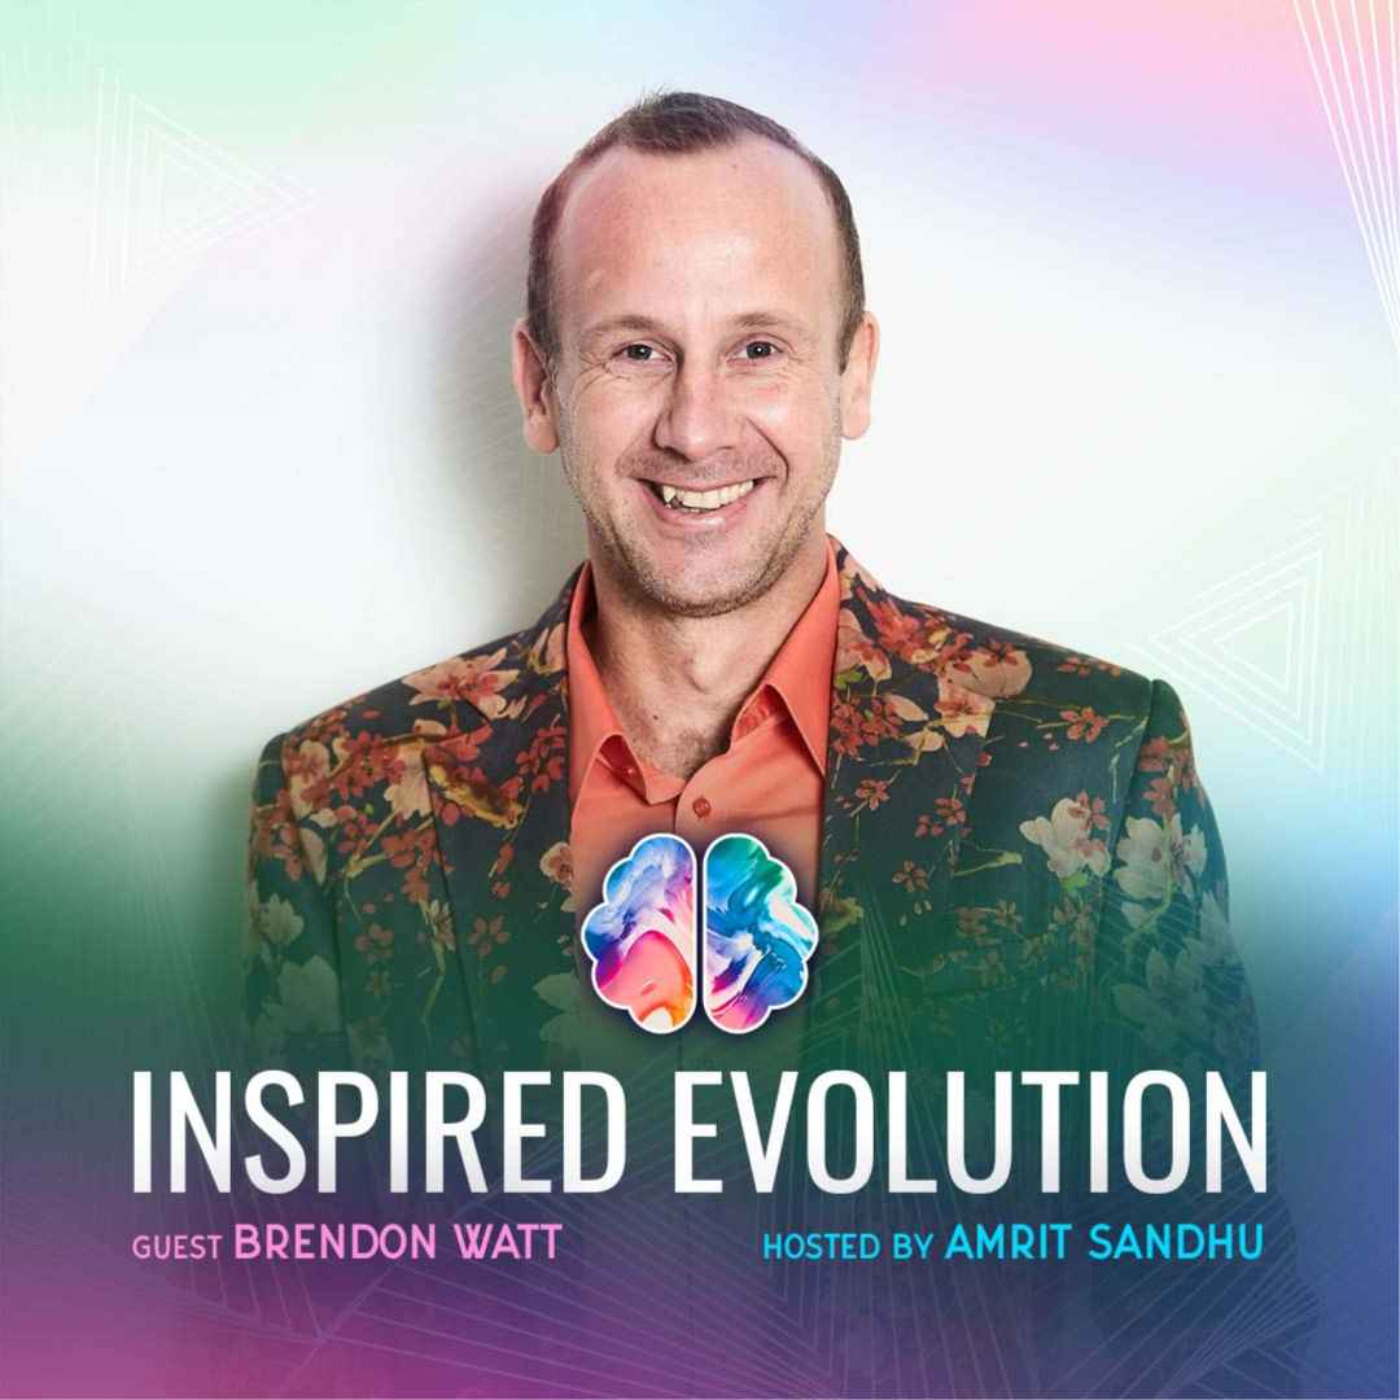 Learn How To Make The Right Choices with Brendon Watt